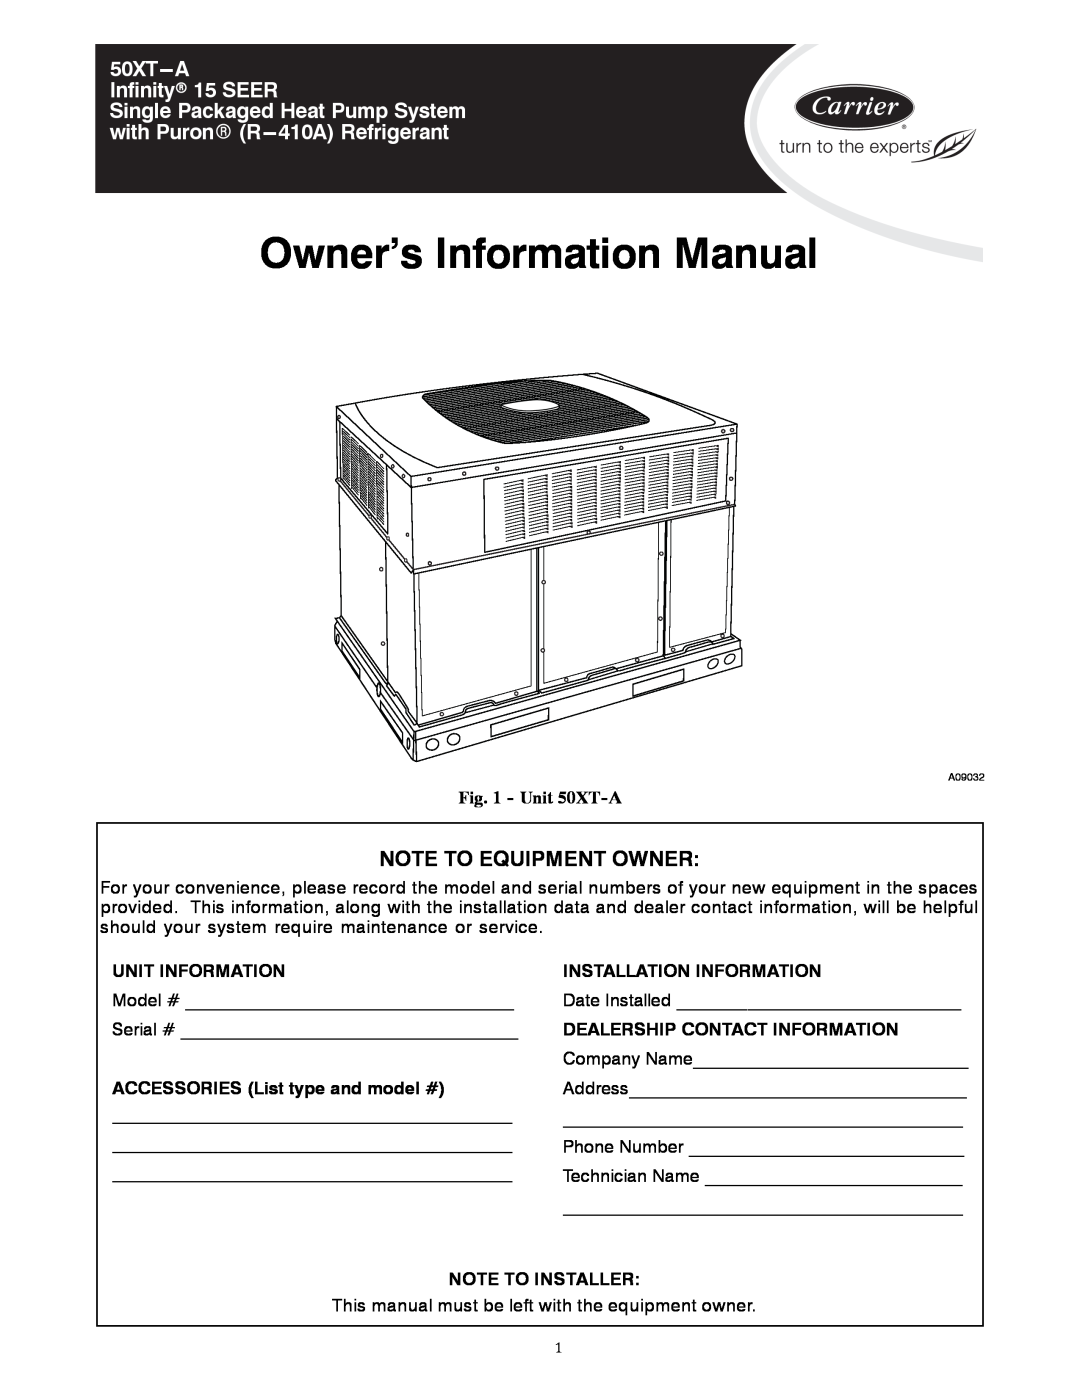 Carrier manual Unit 50XT-A, Owner’s Information Manual, 50XT---A Infinityr 15 SEER, Note To Equipment Owner 